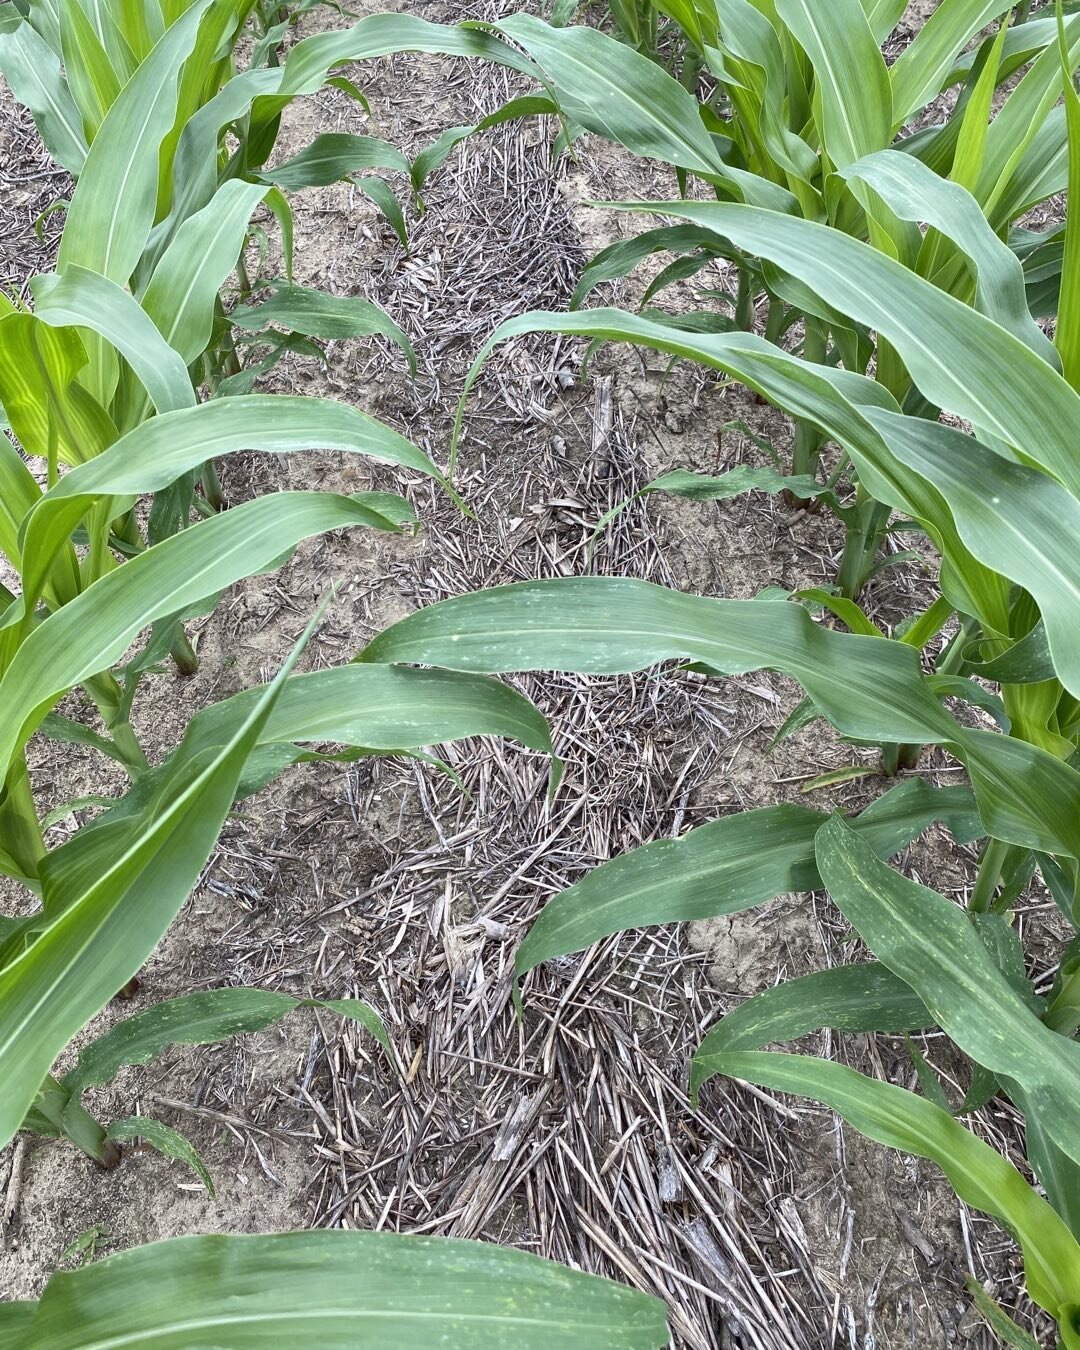 Covercrop still evident under this corn. Holding moisture and inhibiting weeds.